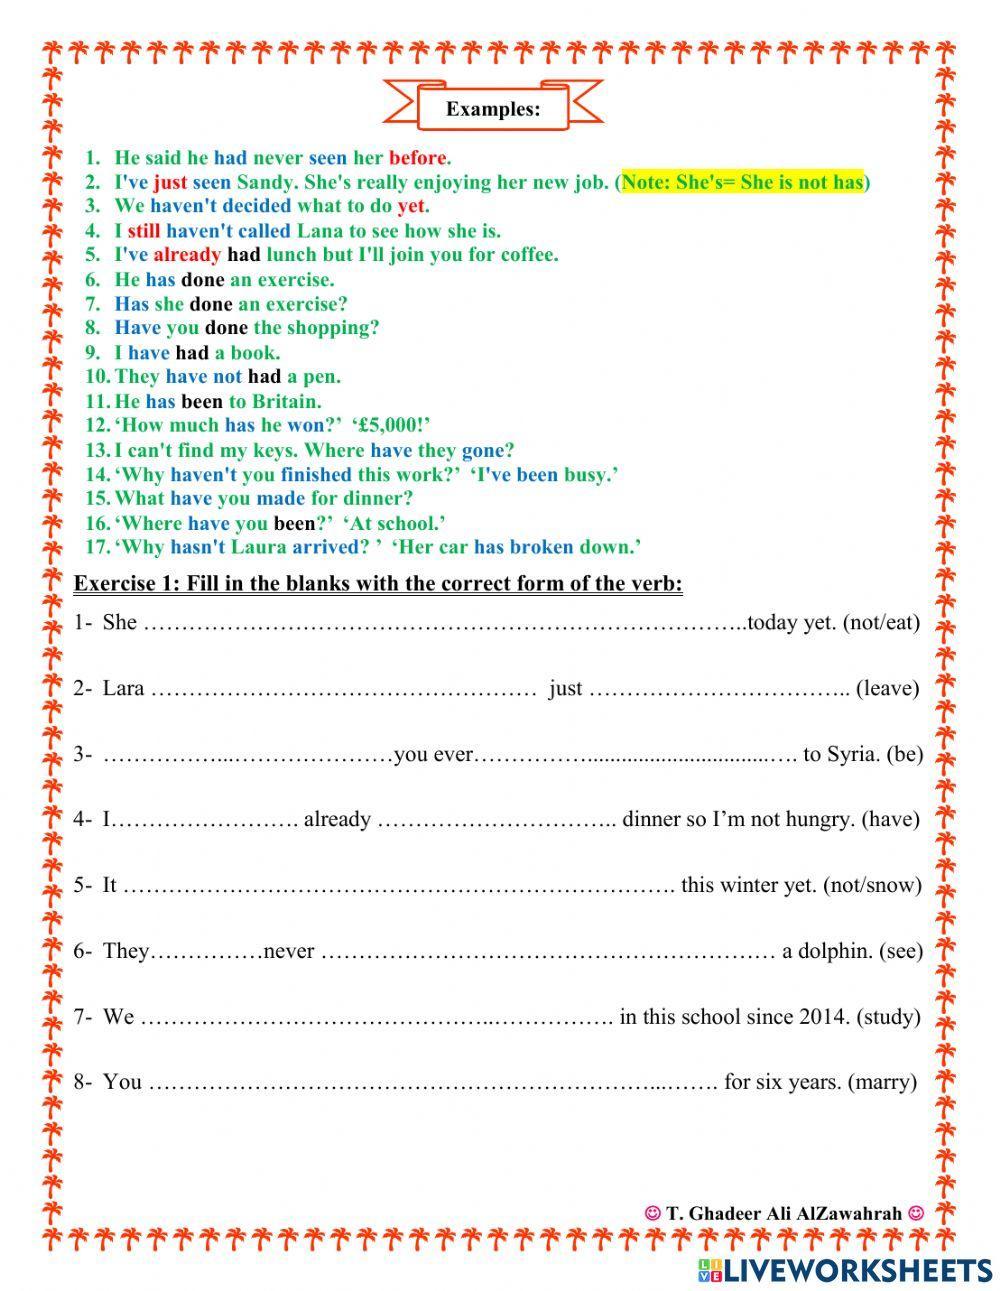 The Present Perfect Simple tense explanation and exercises